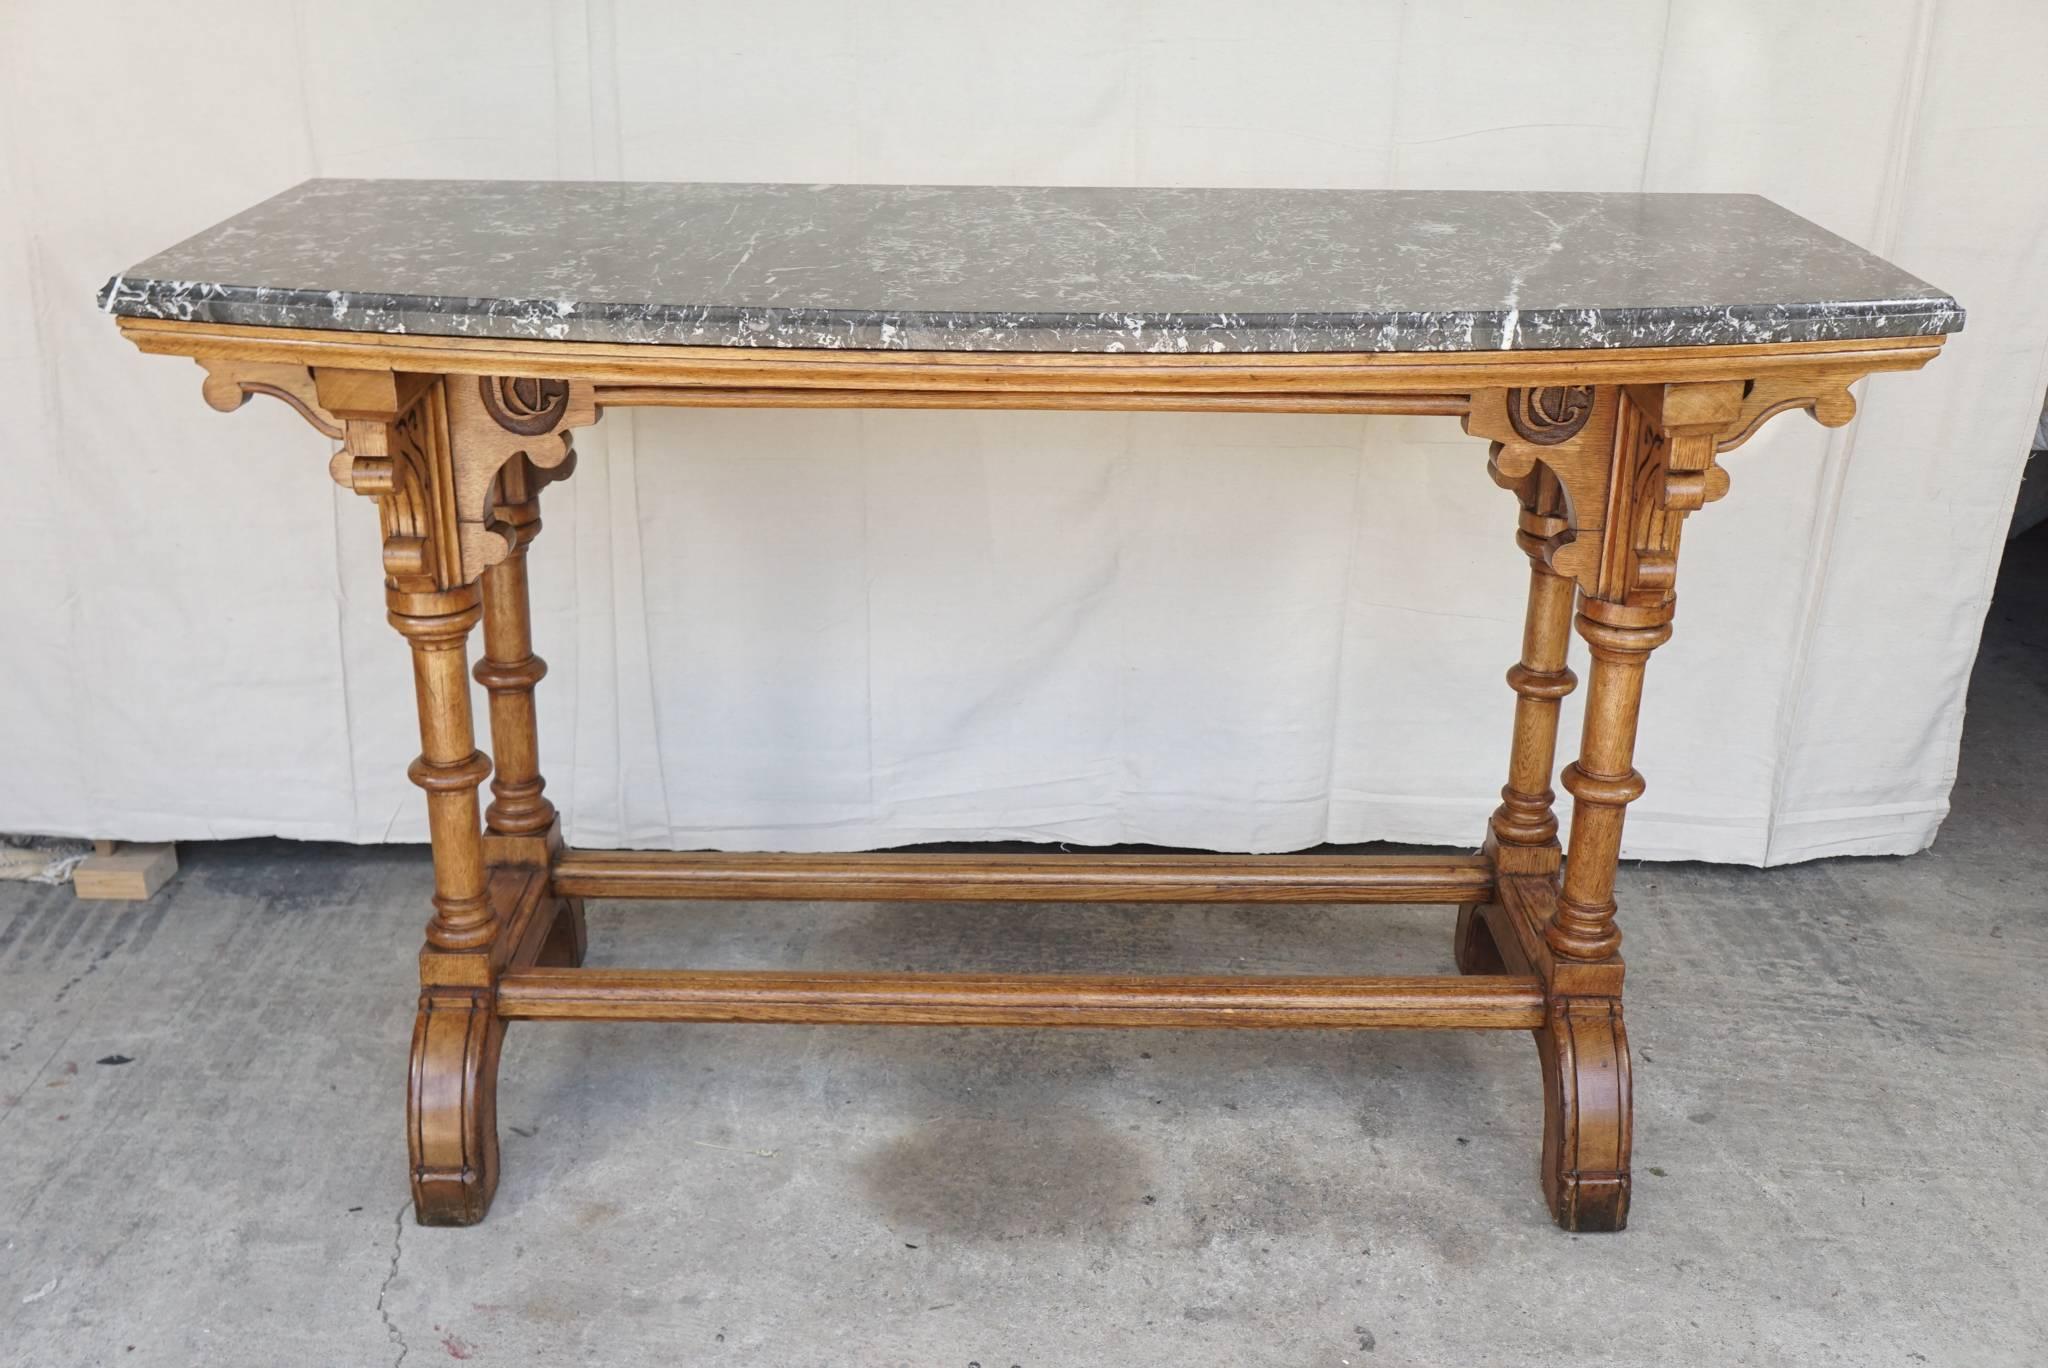 This pair of tables made in England, circa 1870 are from fine and heavy English oak. Parts are carved and incised while other elements are turned. This creates a sense of lightness with an overall airy upward movement. While not architectural like